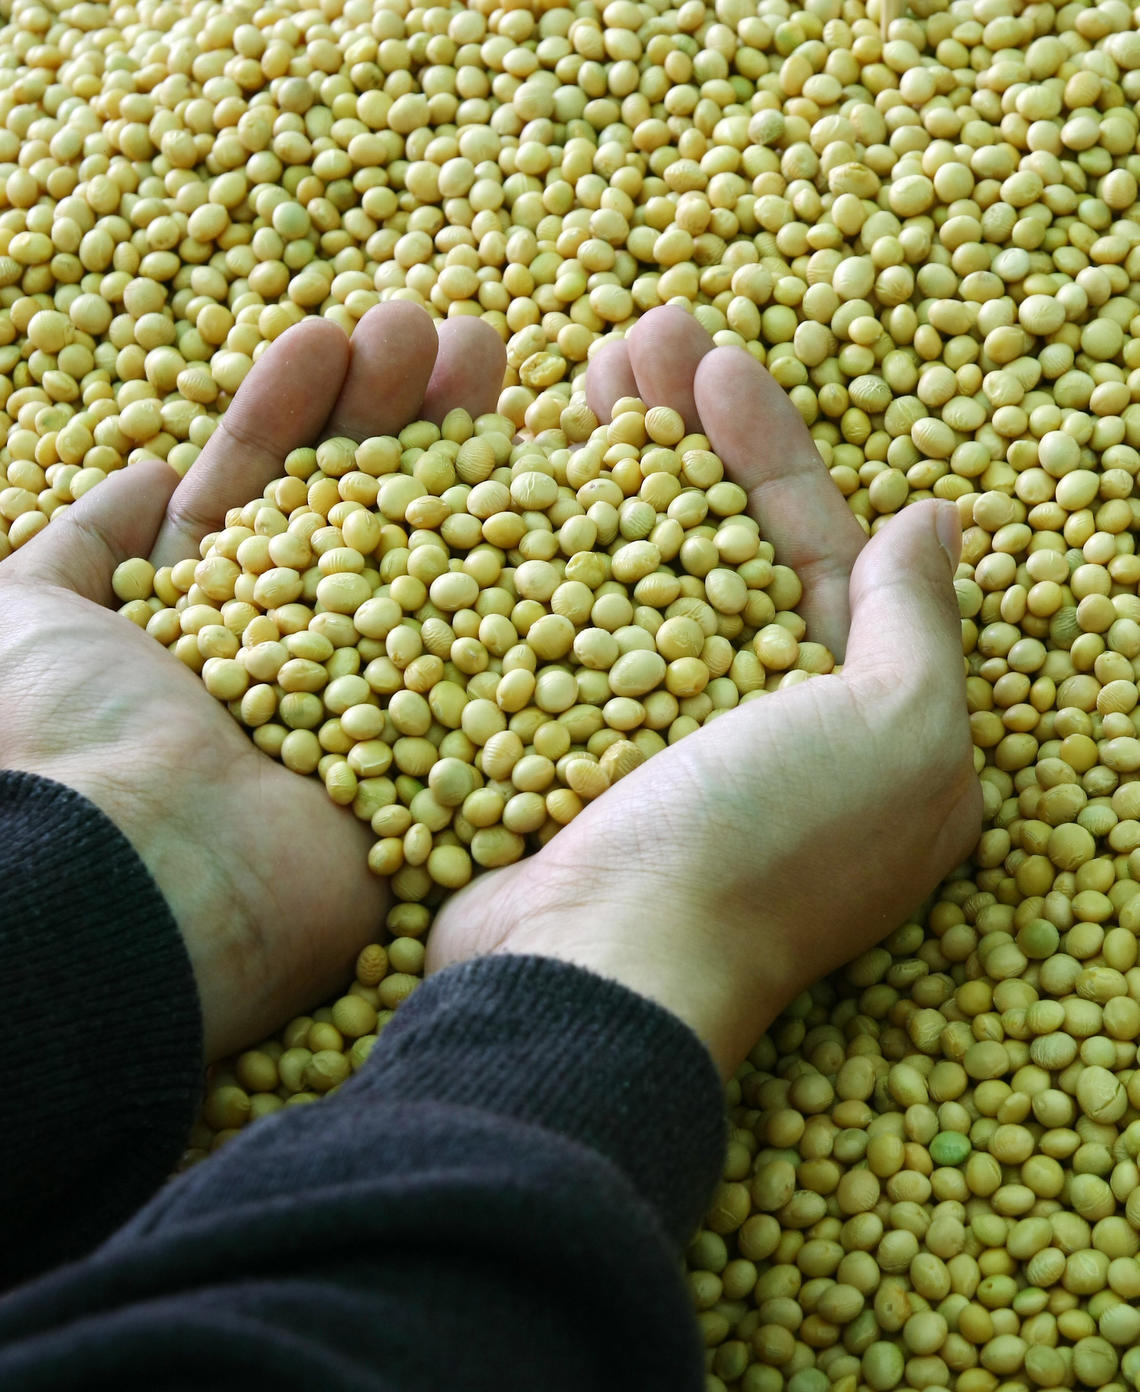 Two hands scooping yellow soy beans from pile